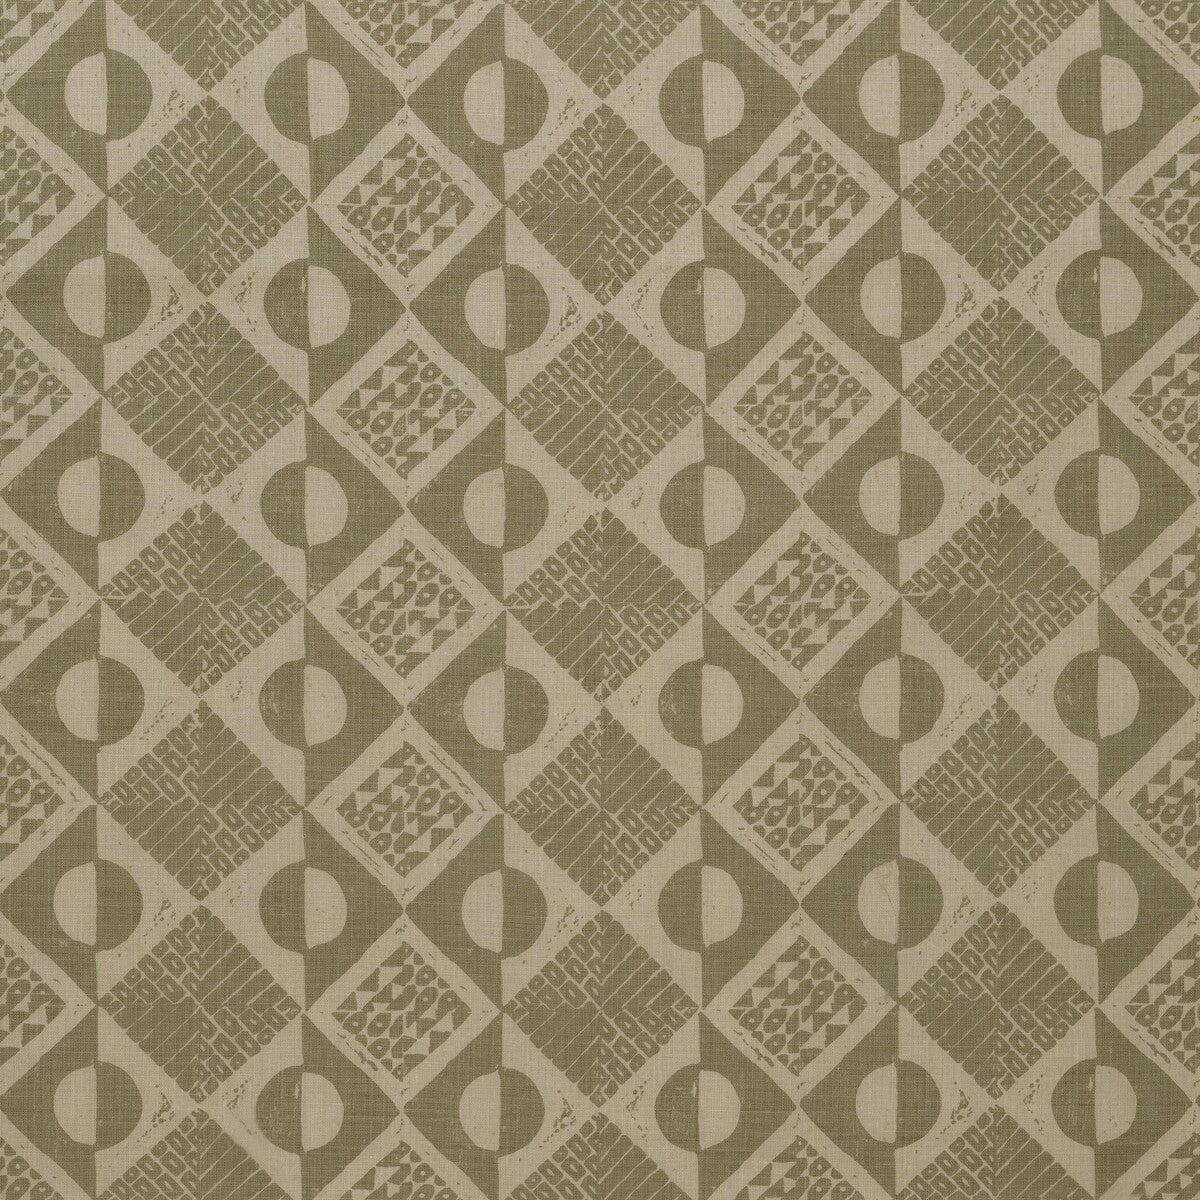 Circles And Squares fabric in dove color - pattern BFC-3666.113.0 - by Lee Jofa in the Blithfield collection